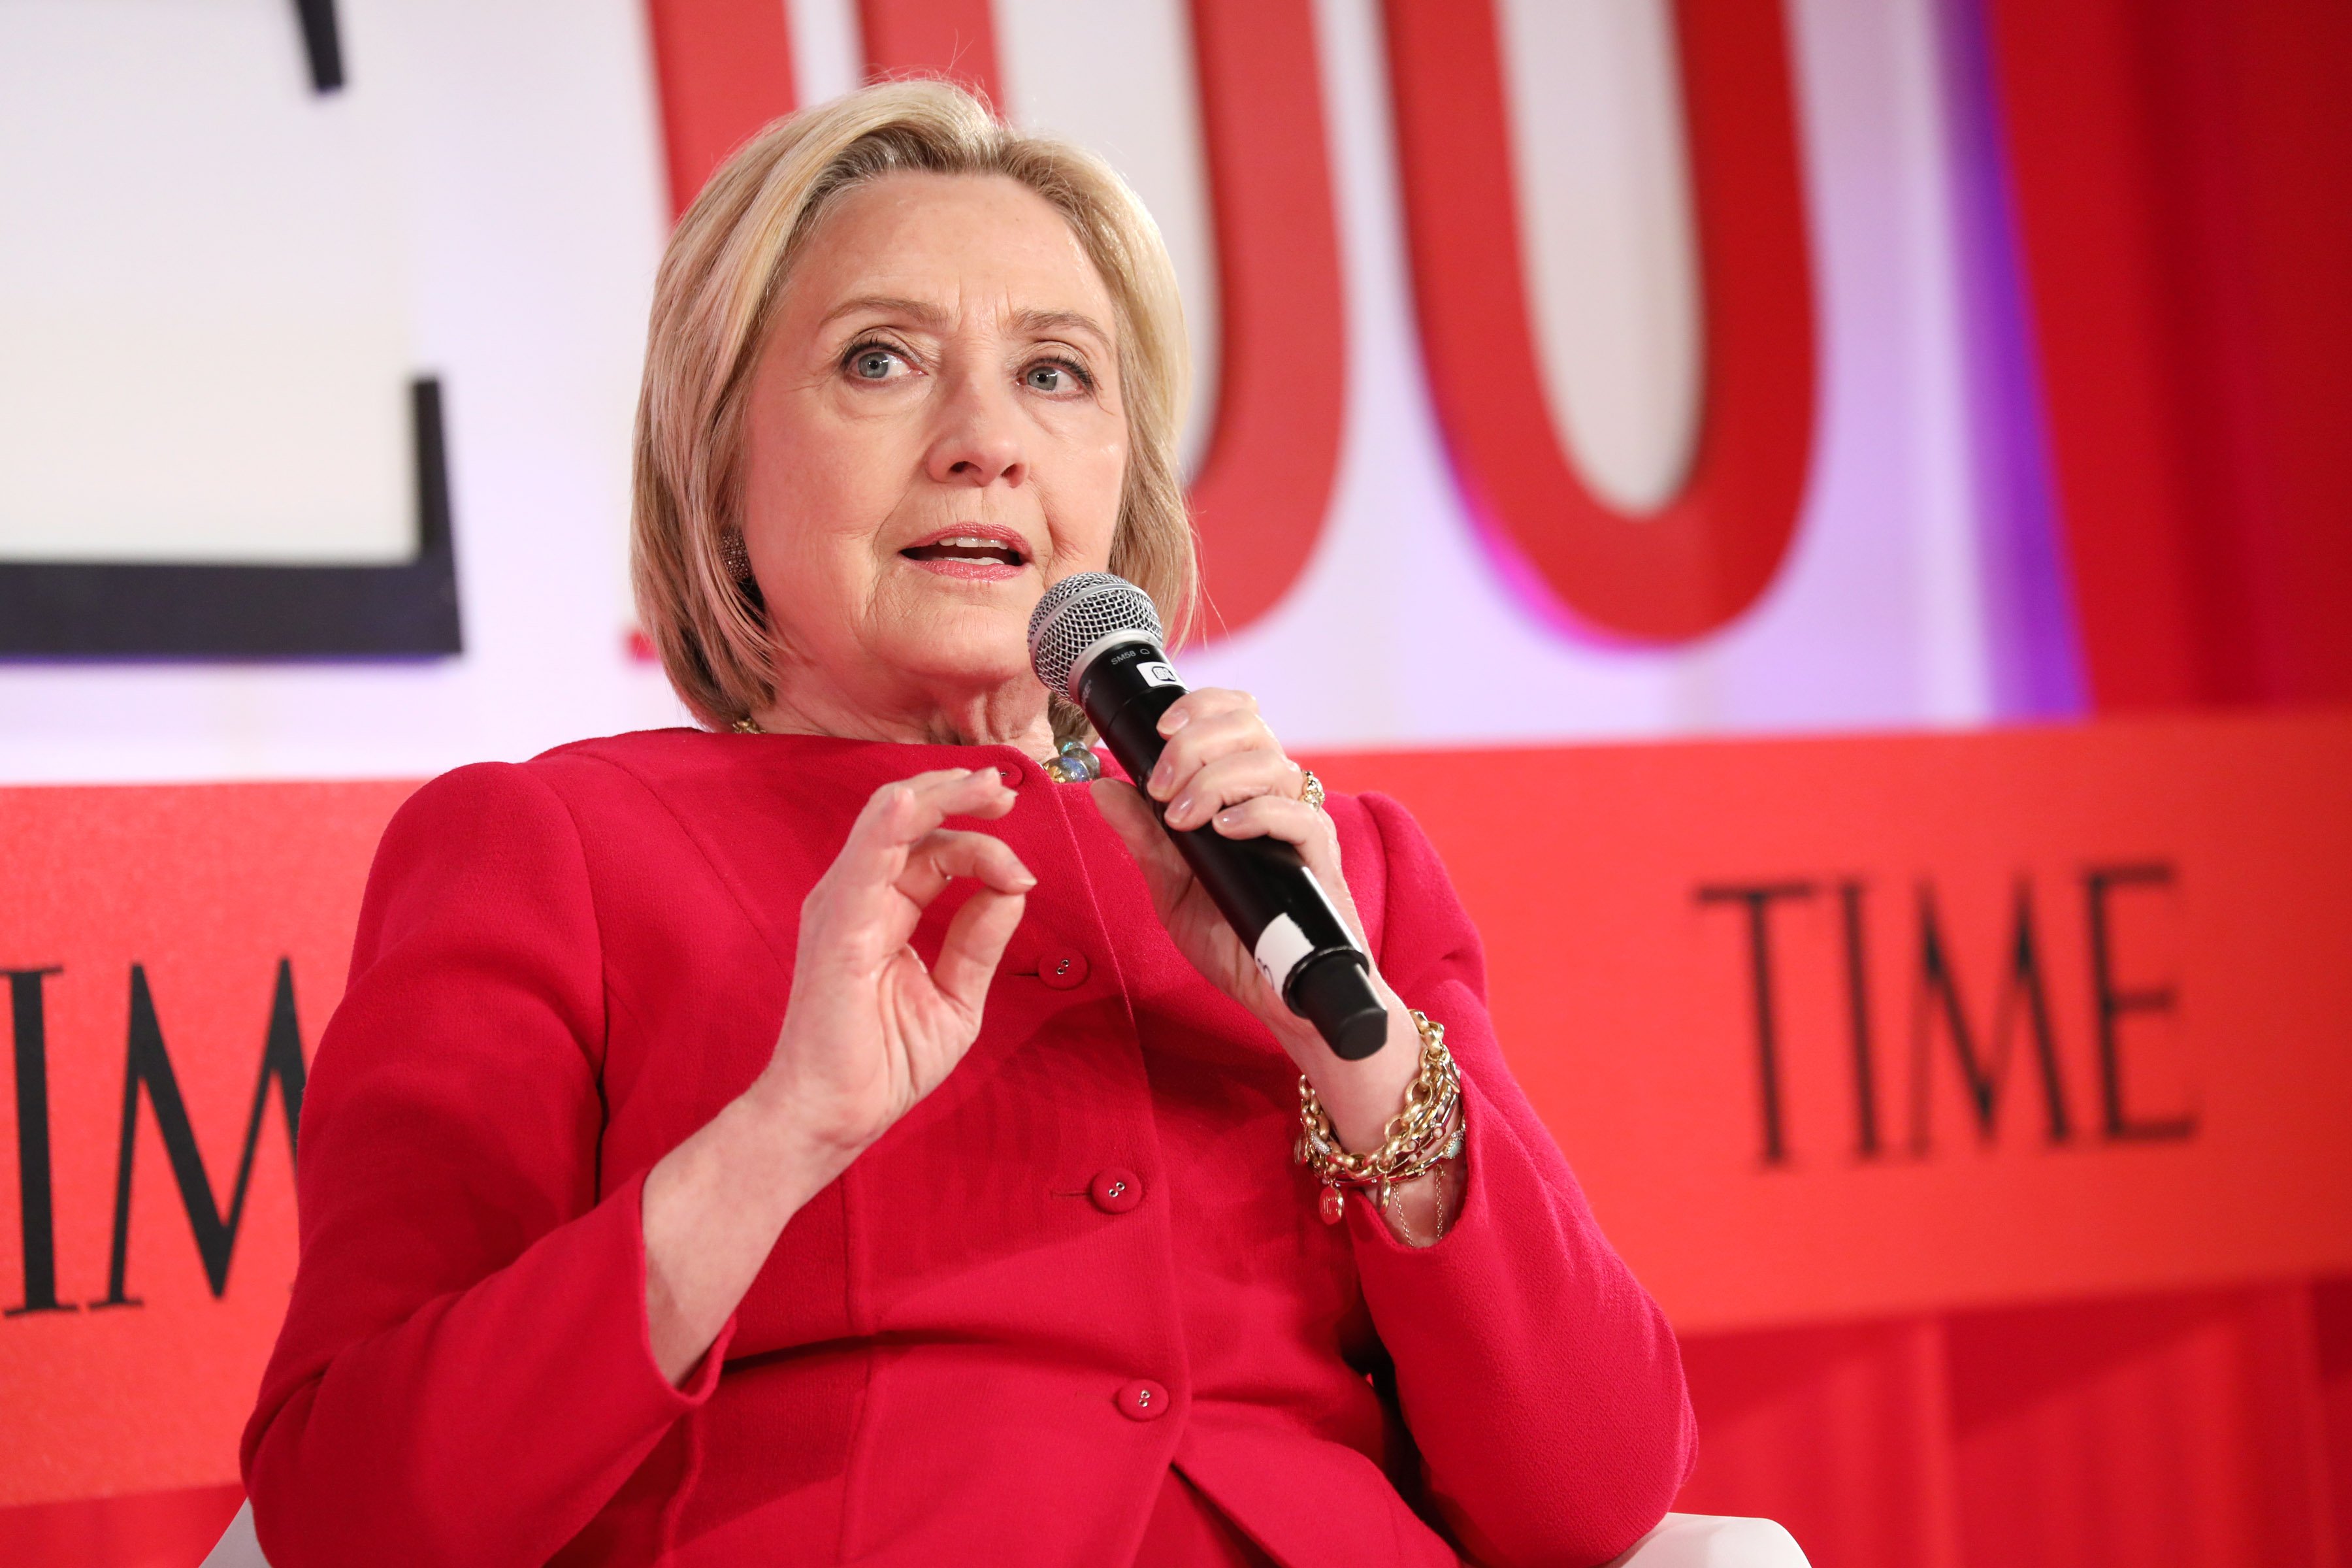 Hillary Clinton speaks at a panel discussion during the Time 100 Summit in New York City on April 23, 2019. | Photo: Getty Images